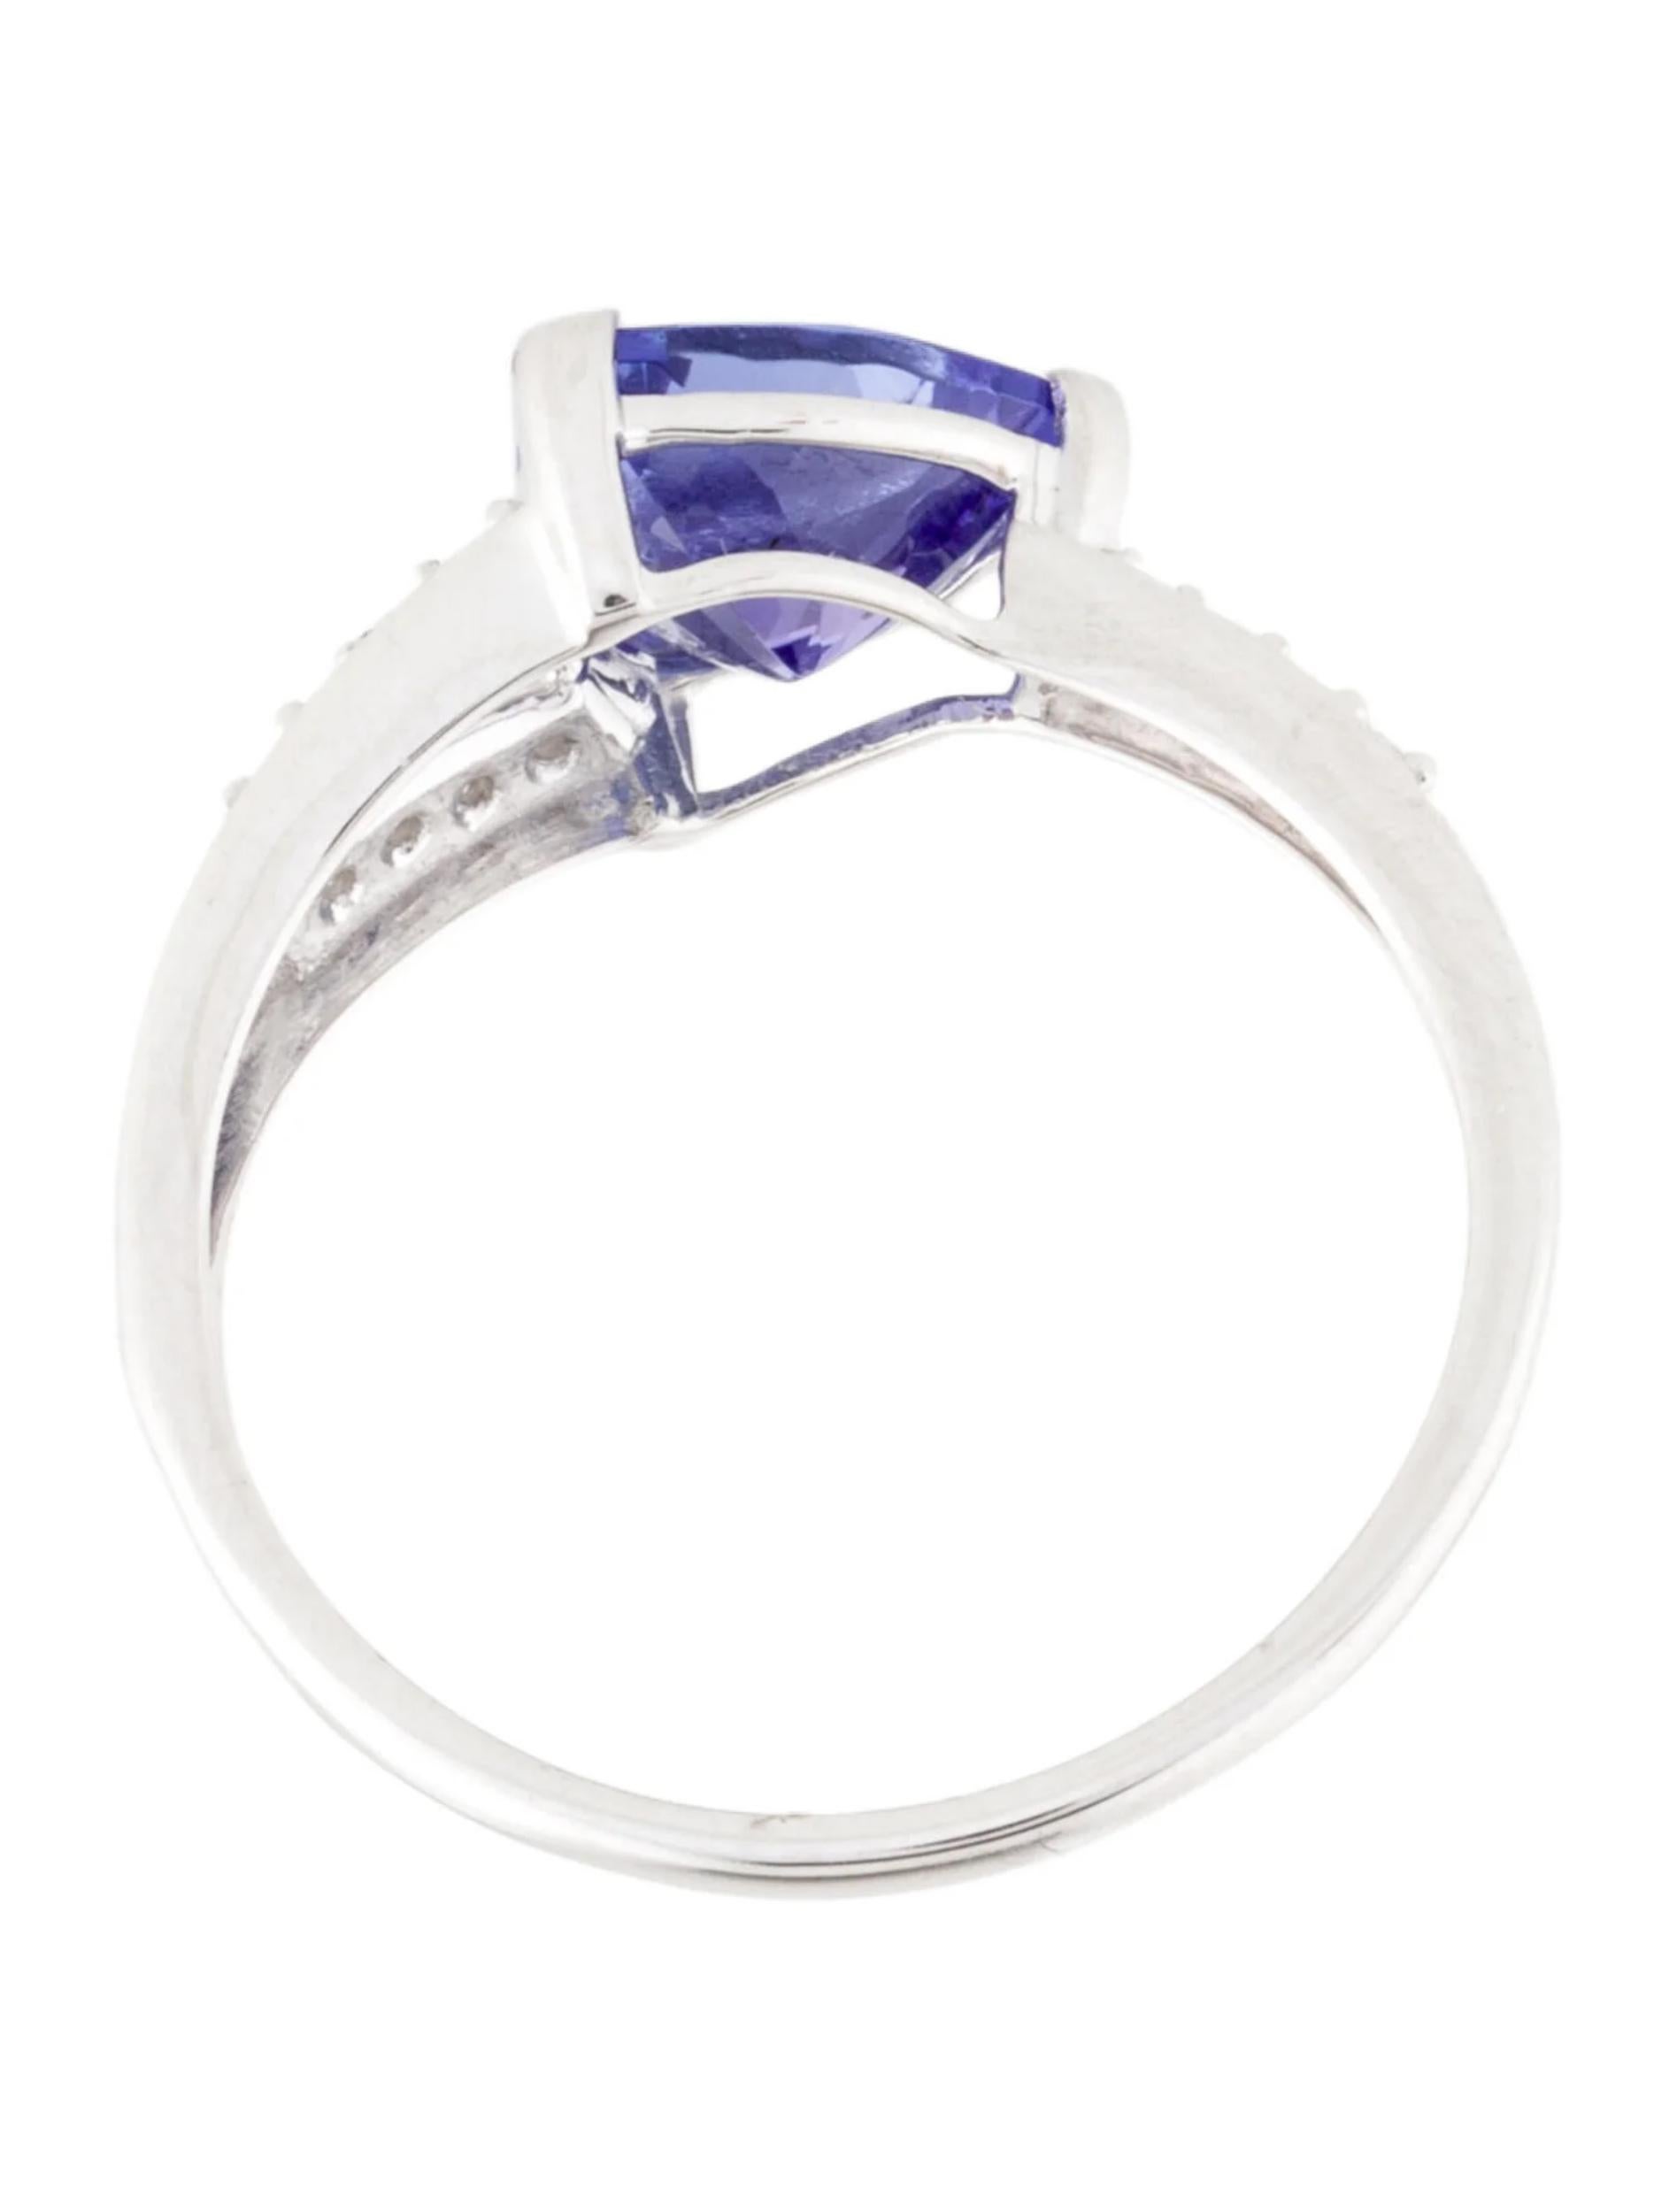 Exquisite 14K Tanzanite & Diamond Cocktail Ring, Size 7.25 - Statement Jewelry In New Condition For Sale In Holtsville, NY